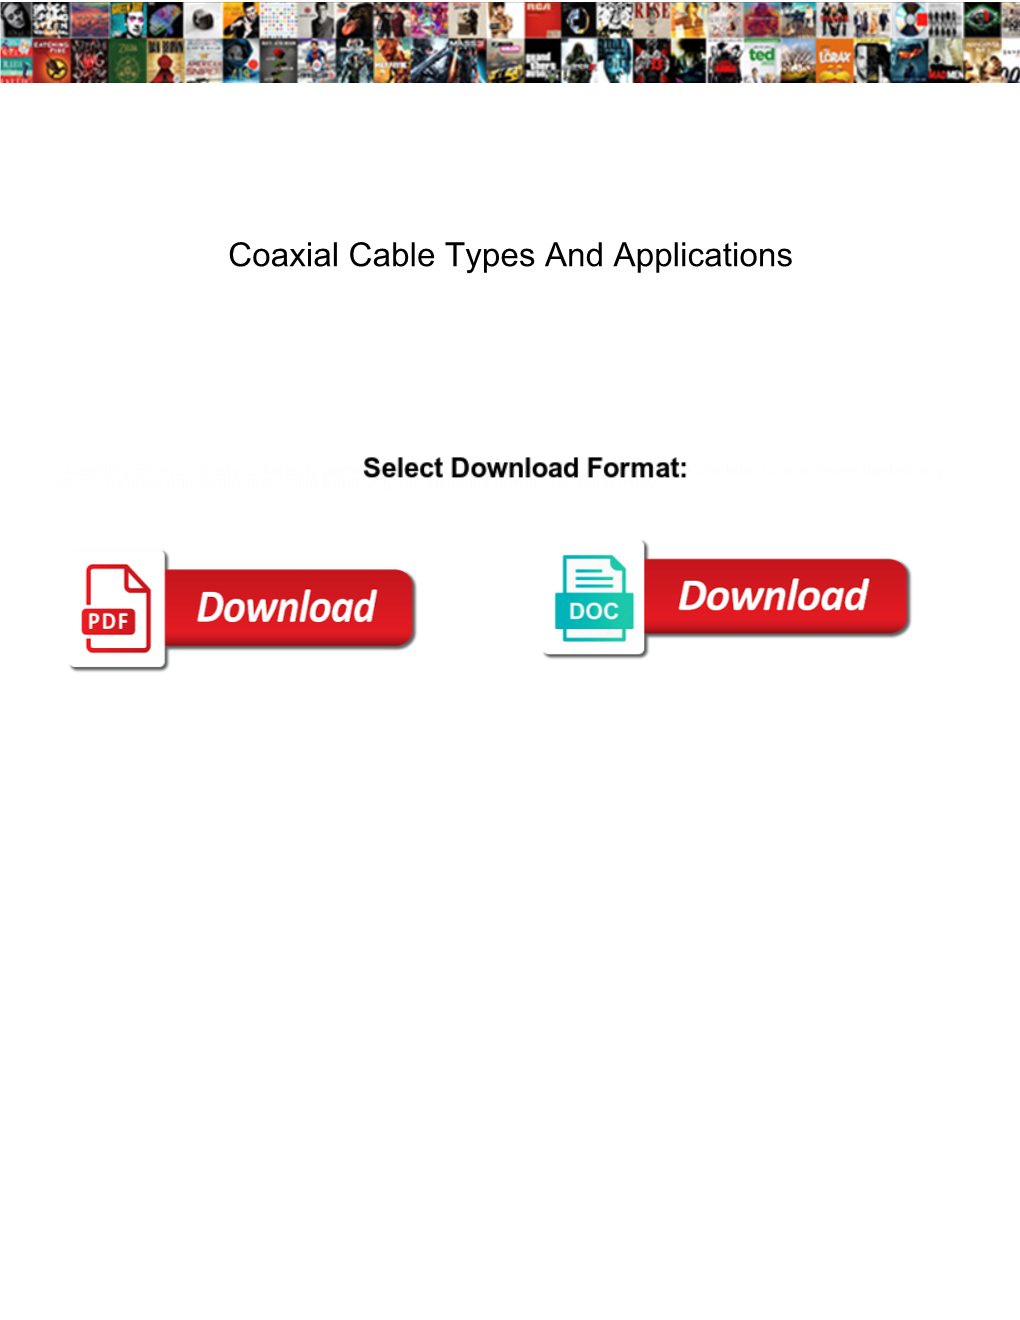 Coaxial Cable Types and Applications